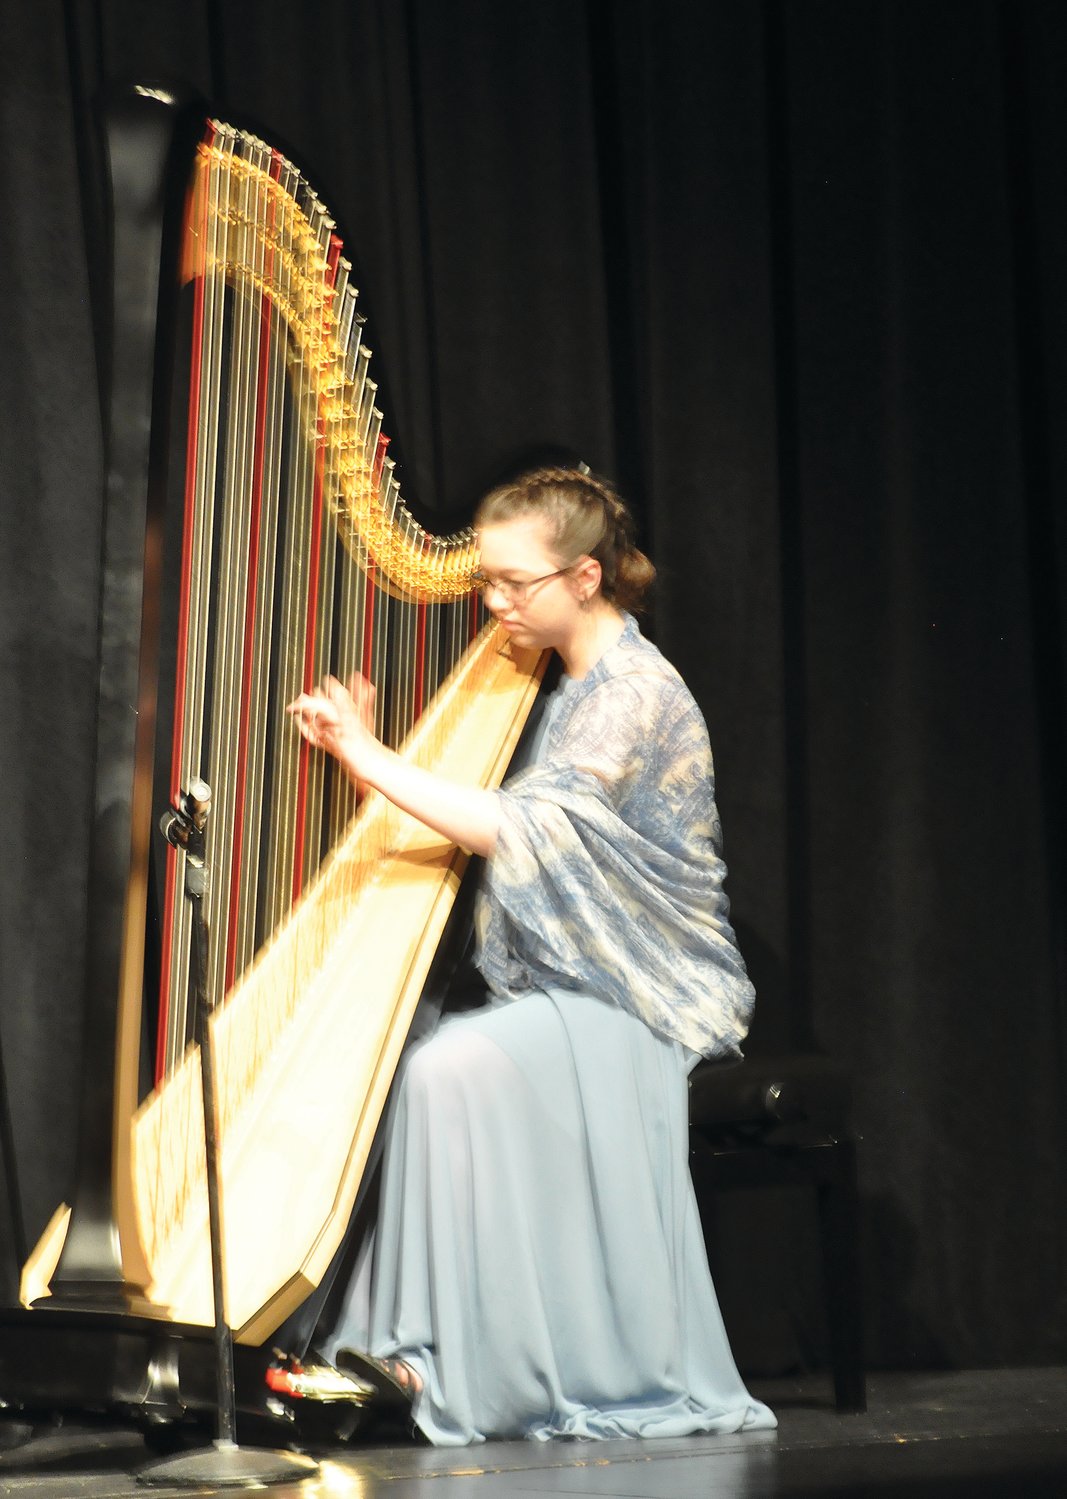 Third place winner Taylor Mermoud plays the harp Saturday in the MoCo's Got Talent for Scholarships competition at Crawfordsville High School. Students from across the county performed aerial and dance routines, music and a ventriloquist act to raise money for the alumni association.